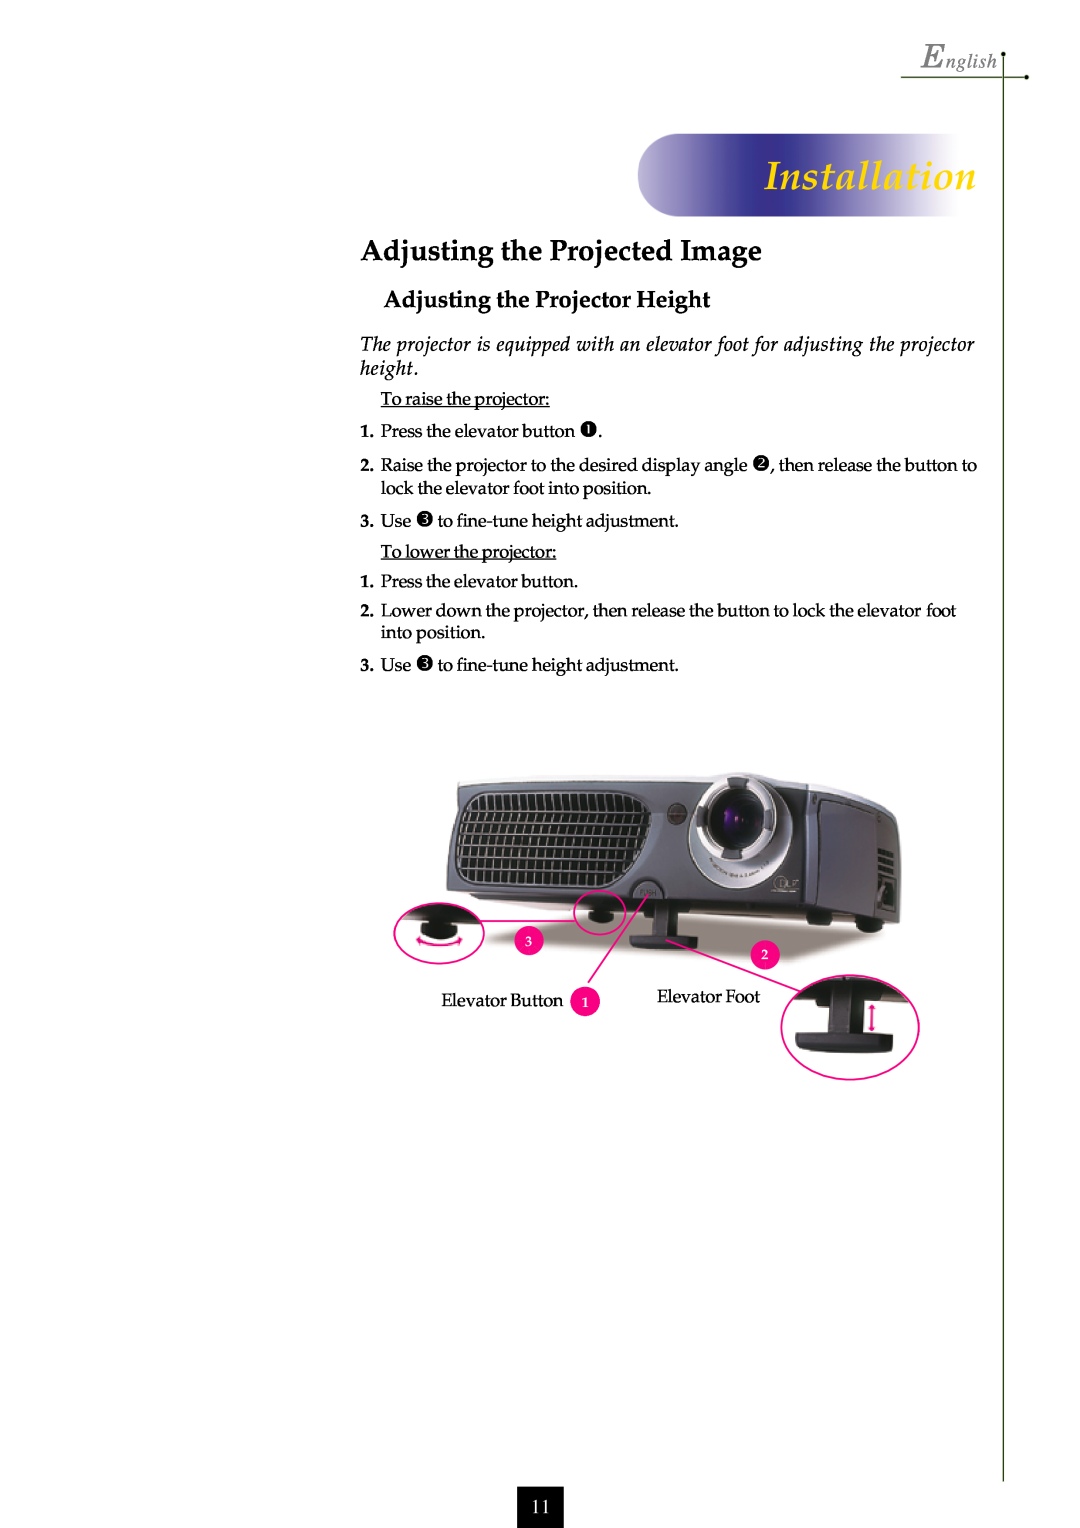 Optoma Technology EP750 specifications Adjusting the Projected Image, Adjusting the Projector Height, Installation, English 